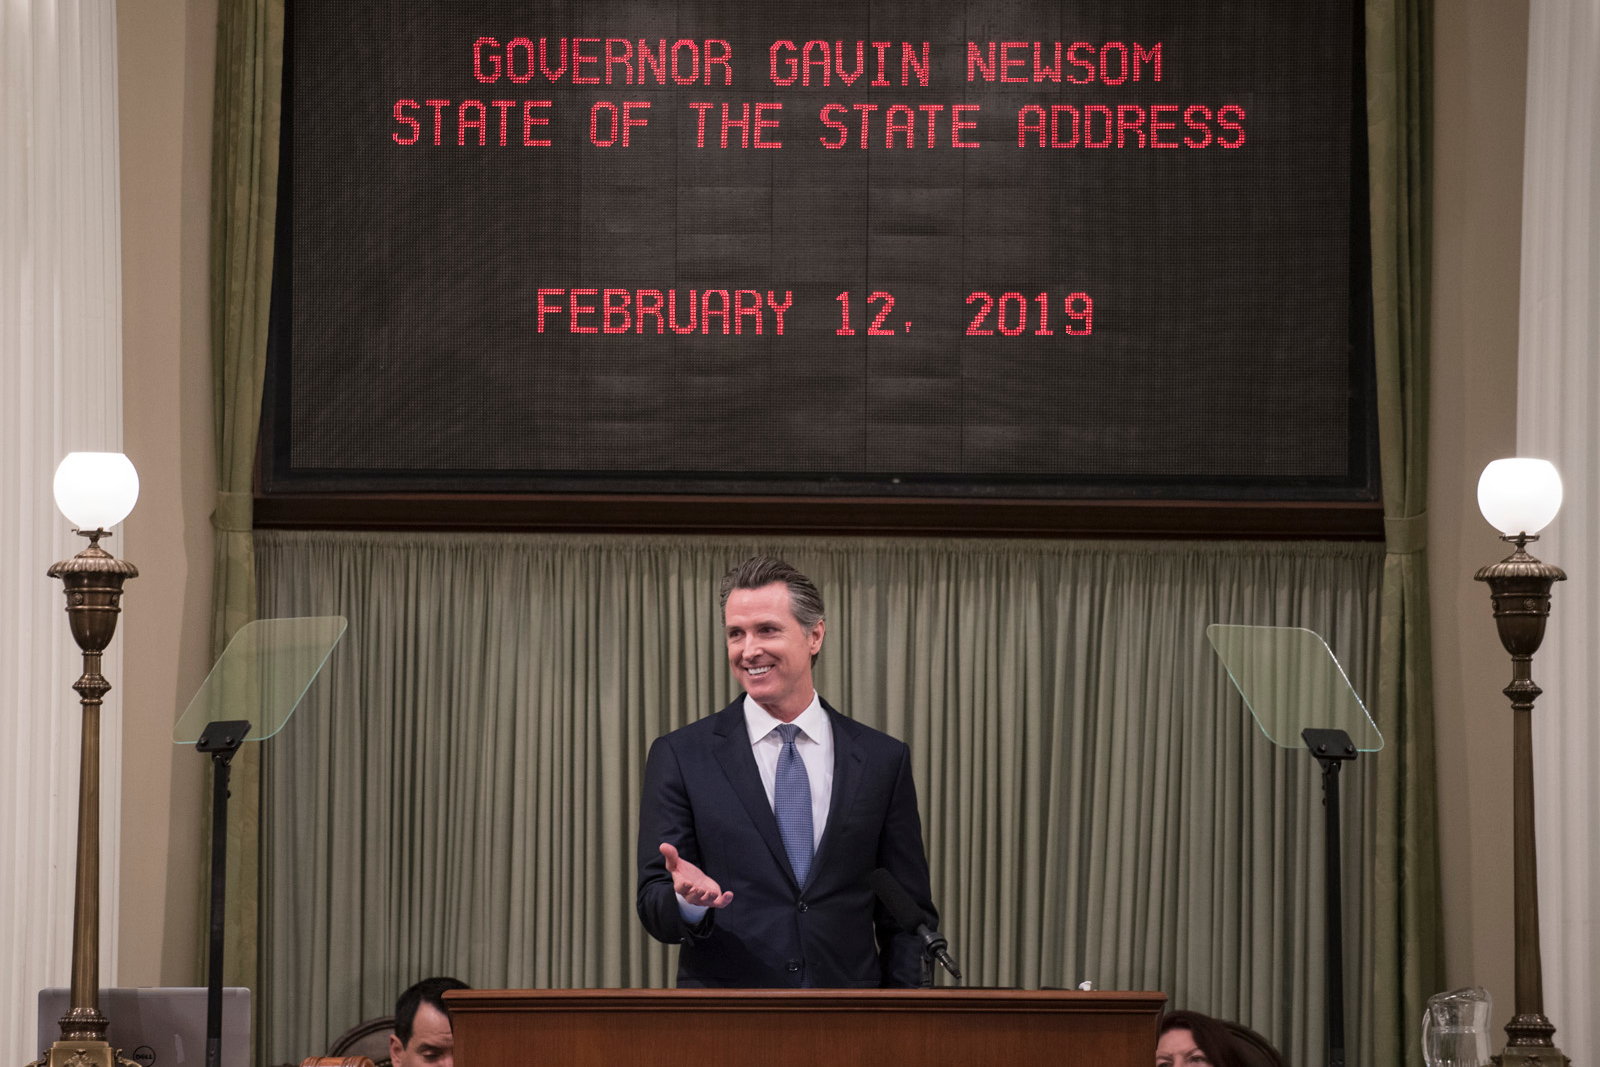 Governor Newsom Delivers State of the State Address.